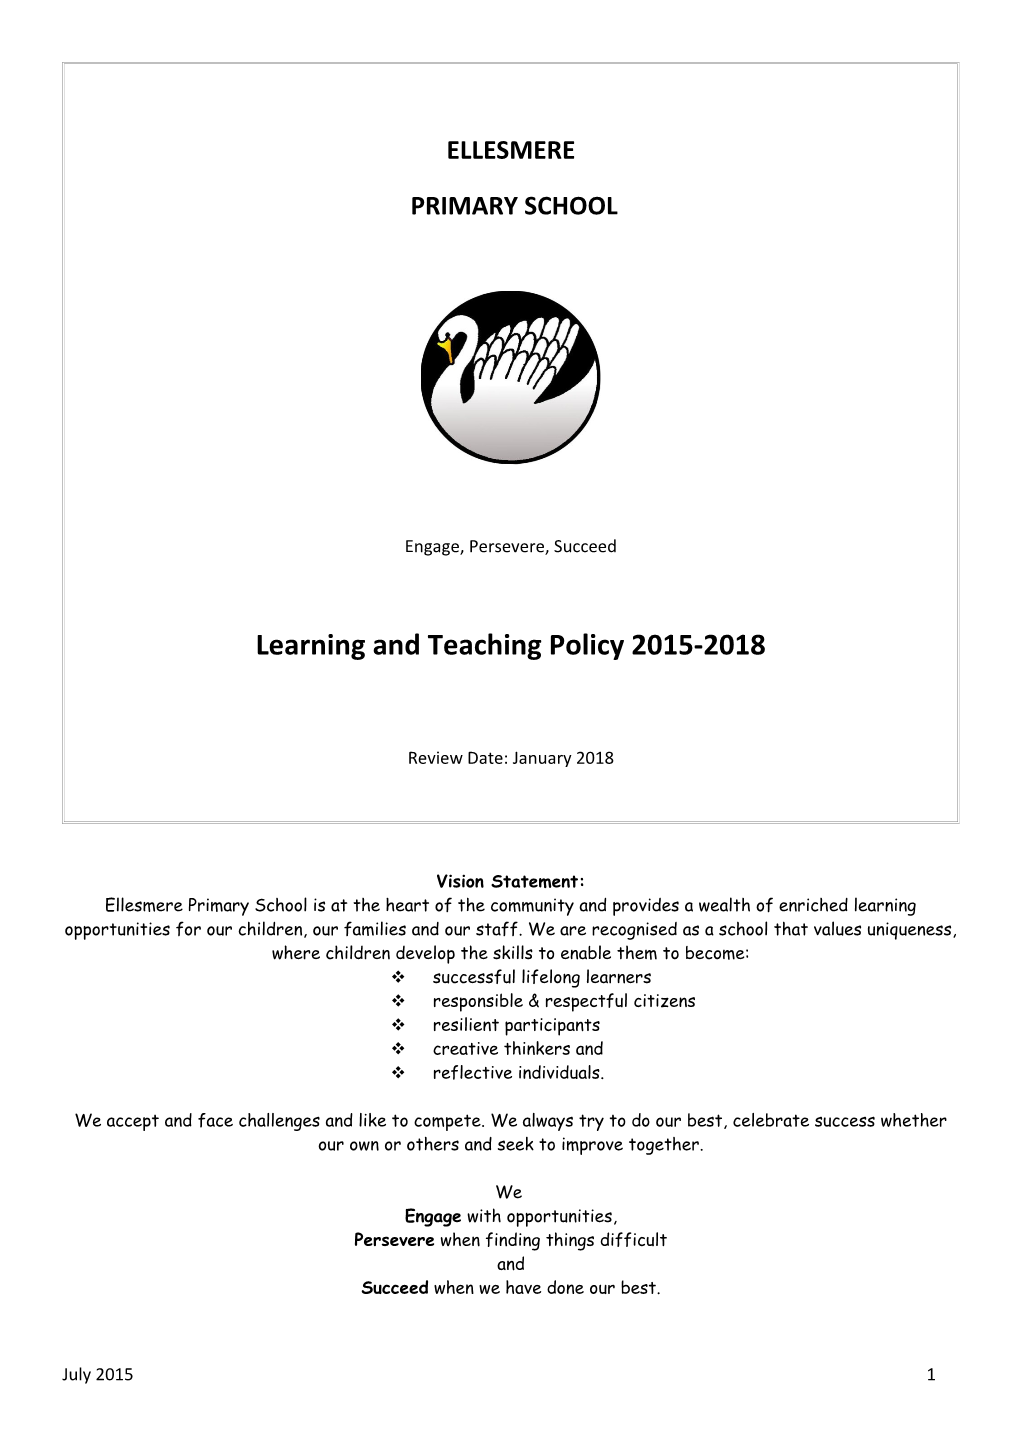 Learning and Teaching Policy 2015-2018